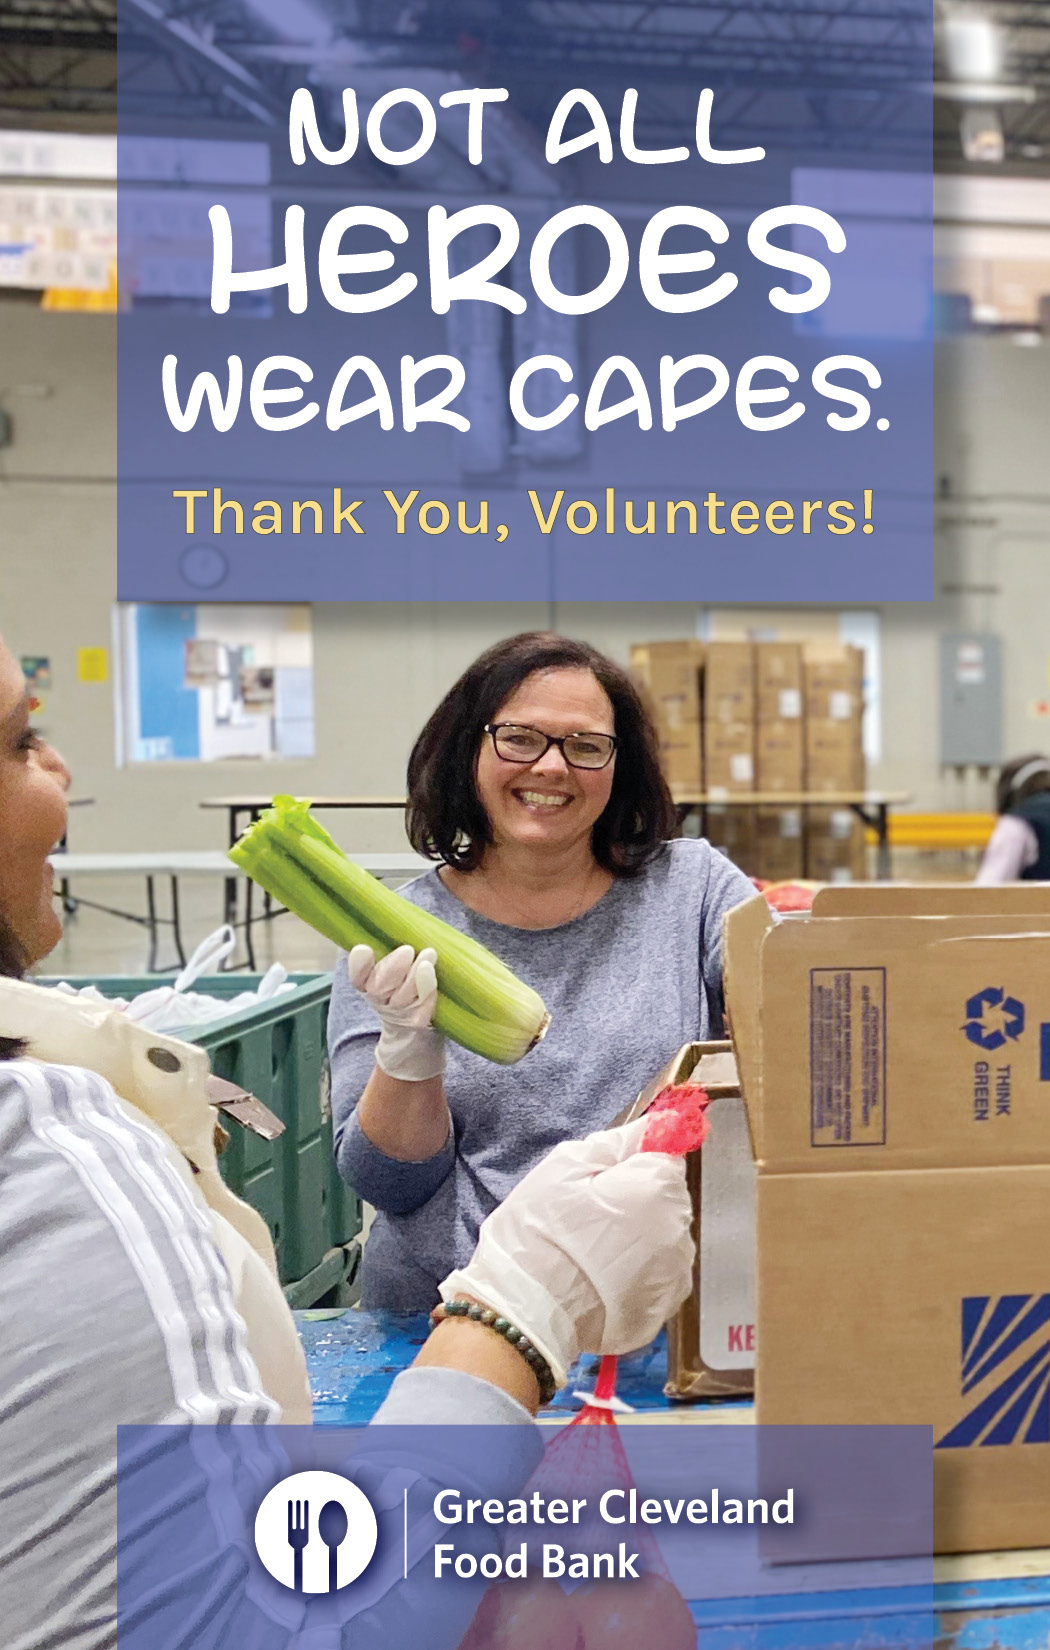 Not all heroes wear capes: a volunteer smiles while packaging vegetables at the Food Bank.